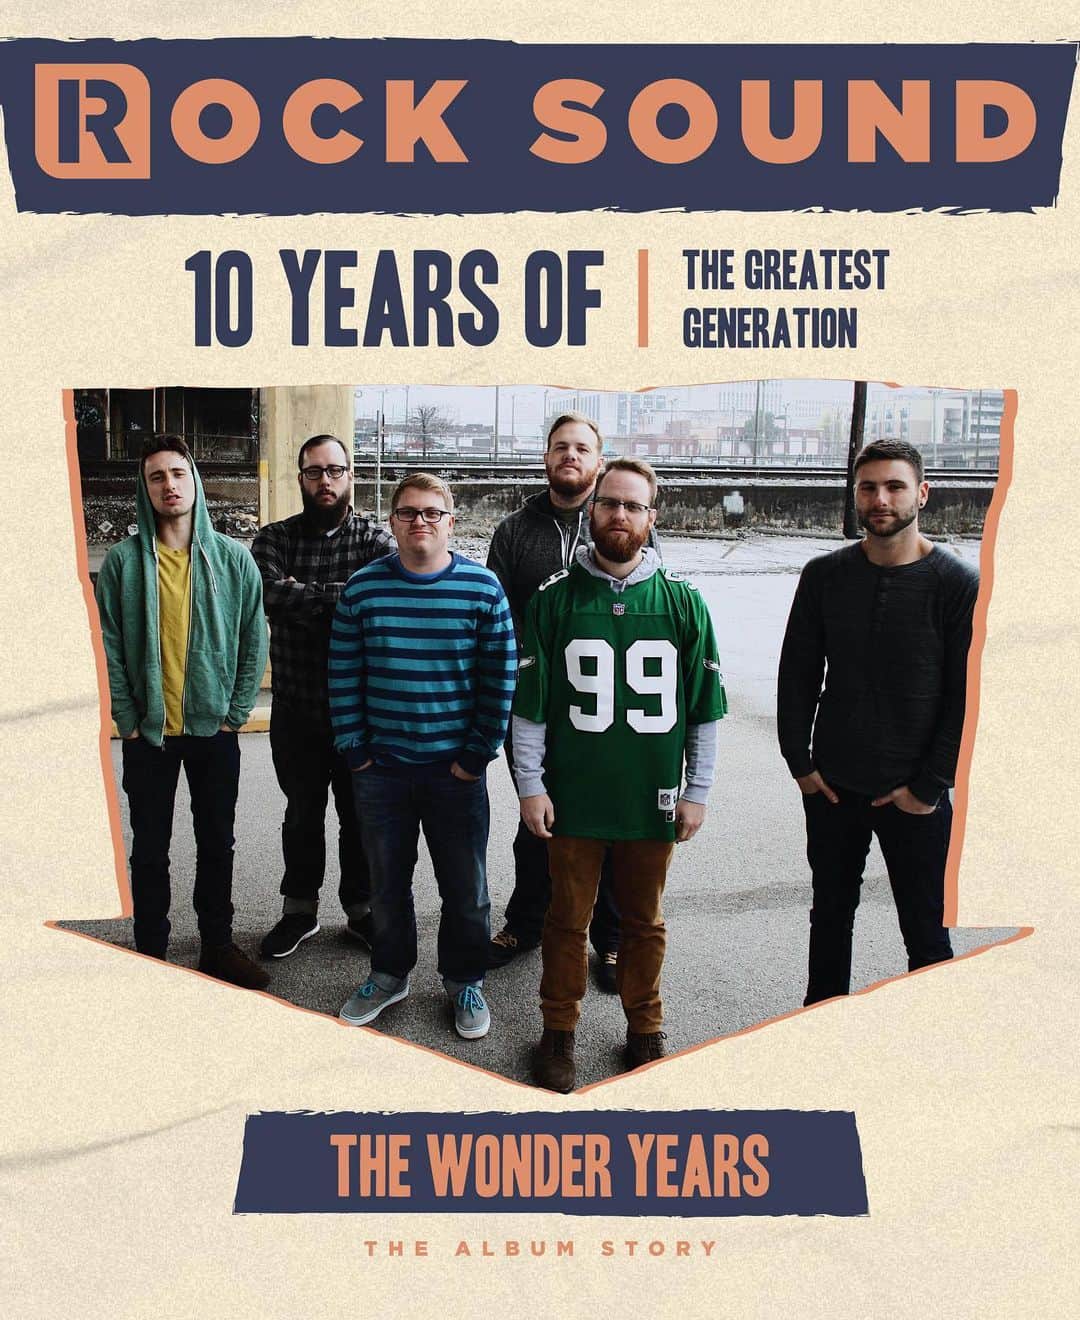 Rock Soundのインスタグラム：「The Wonder Years, 'The Greatest Generation' | The Album Story  Dan 'Soupy' Campbell reflects on making their landmark album and revisiting it for the 10th anniversary tour  Plus, we have teamed up with the band to bring you this world exclusive t-shirt design   Read the feature and get your t-shirt at ROCKSOUND.TV, link in bio   #thewonderyears #thewonderyearsband #rock #alternative #punk #poppunk」